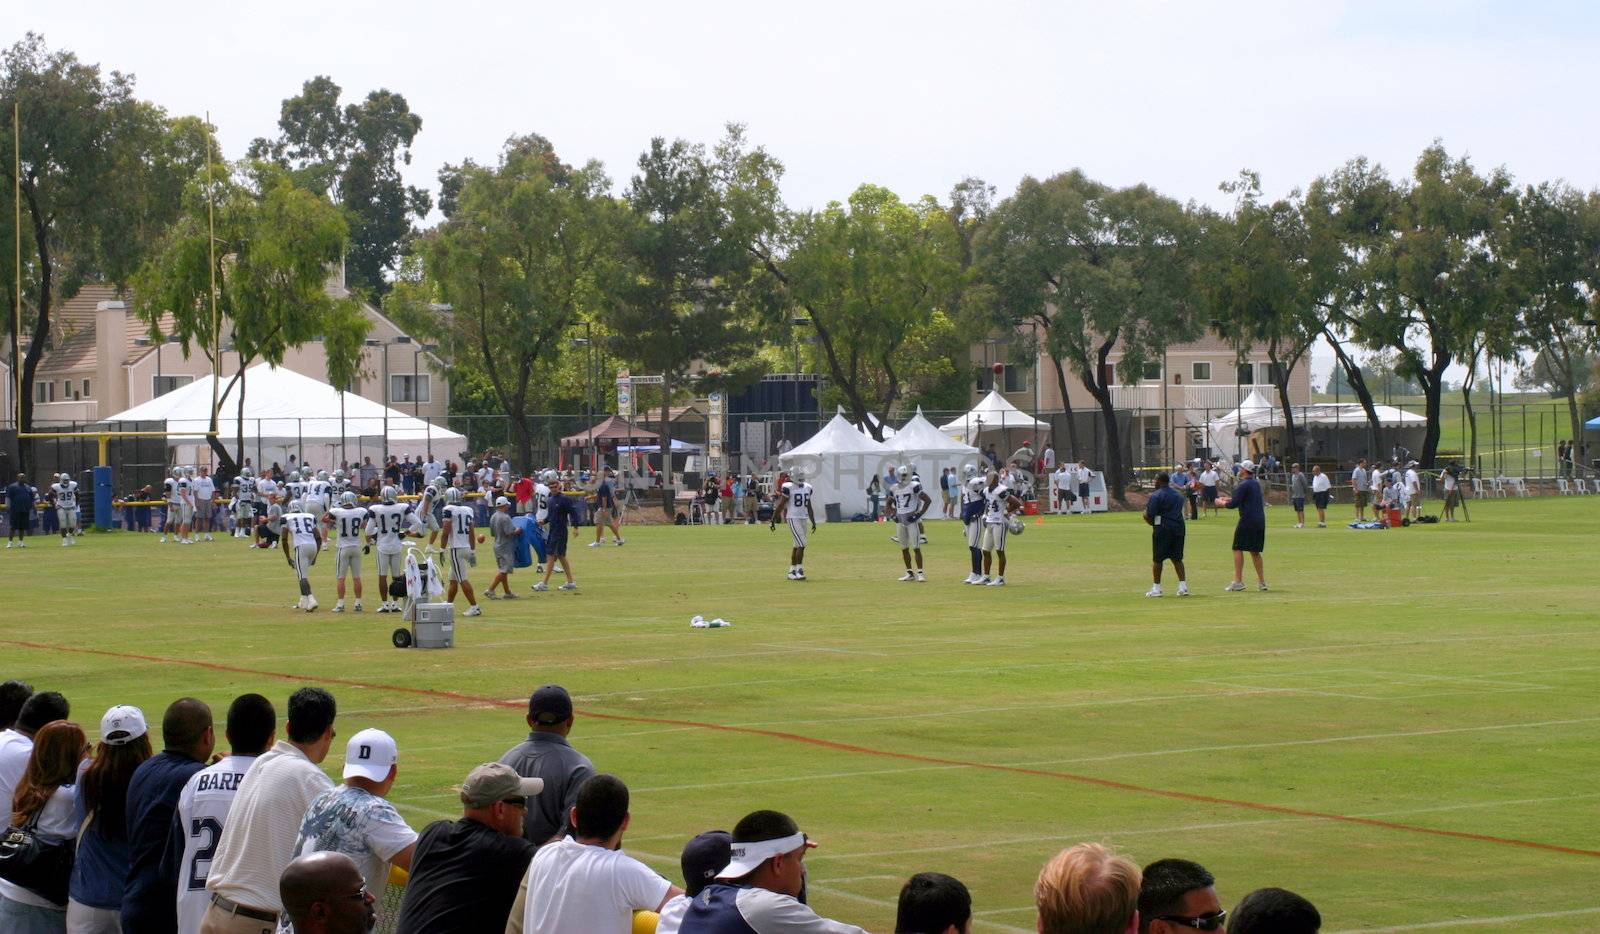 The Dallas Cowboys at their 2008 summer training camp in Oxnard, CA during a training session working out.